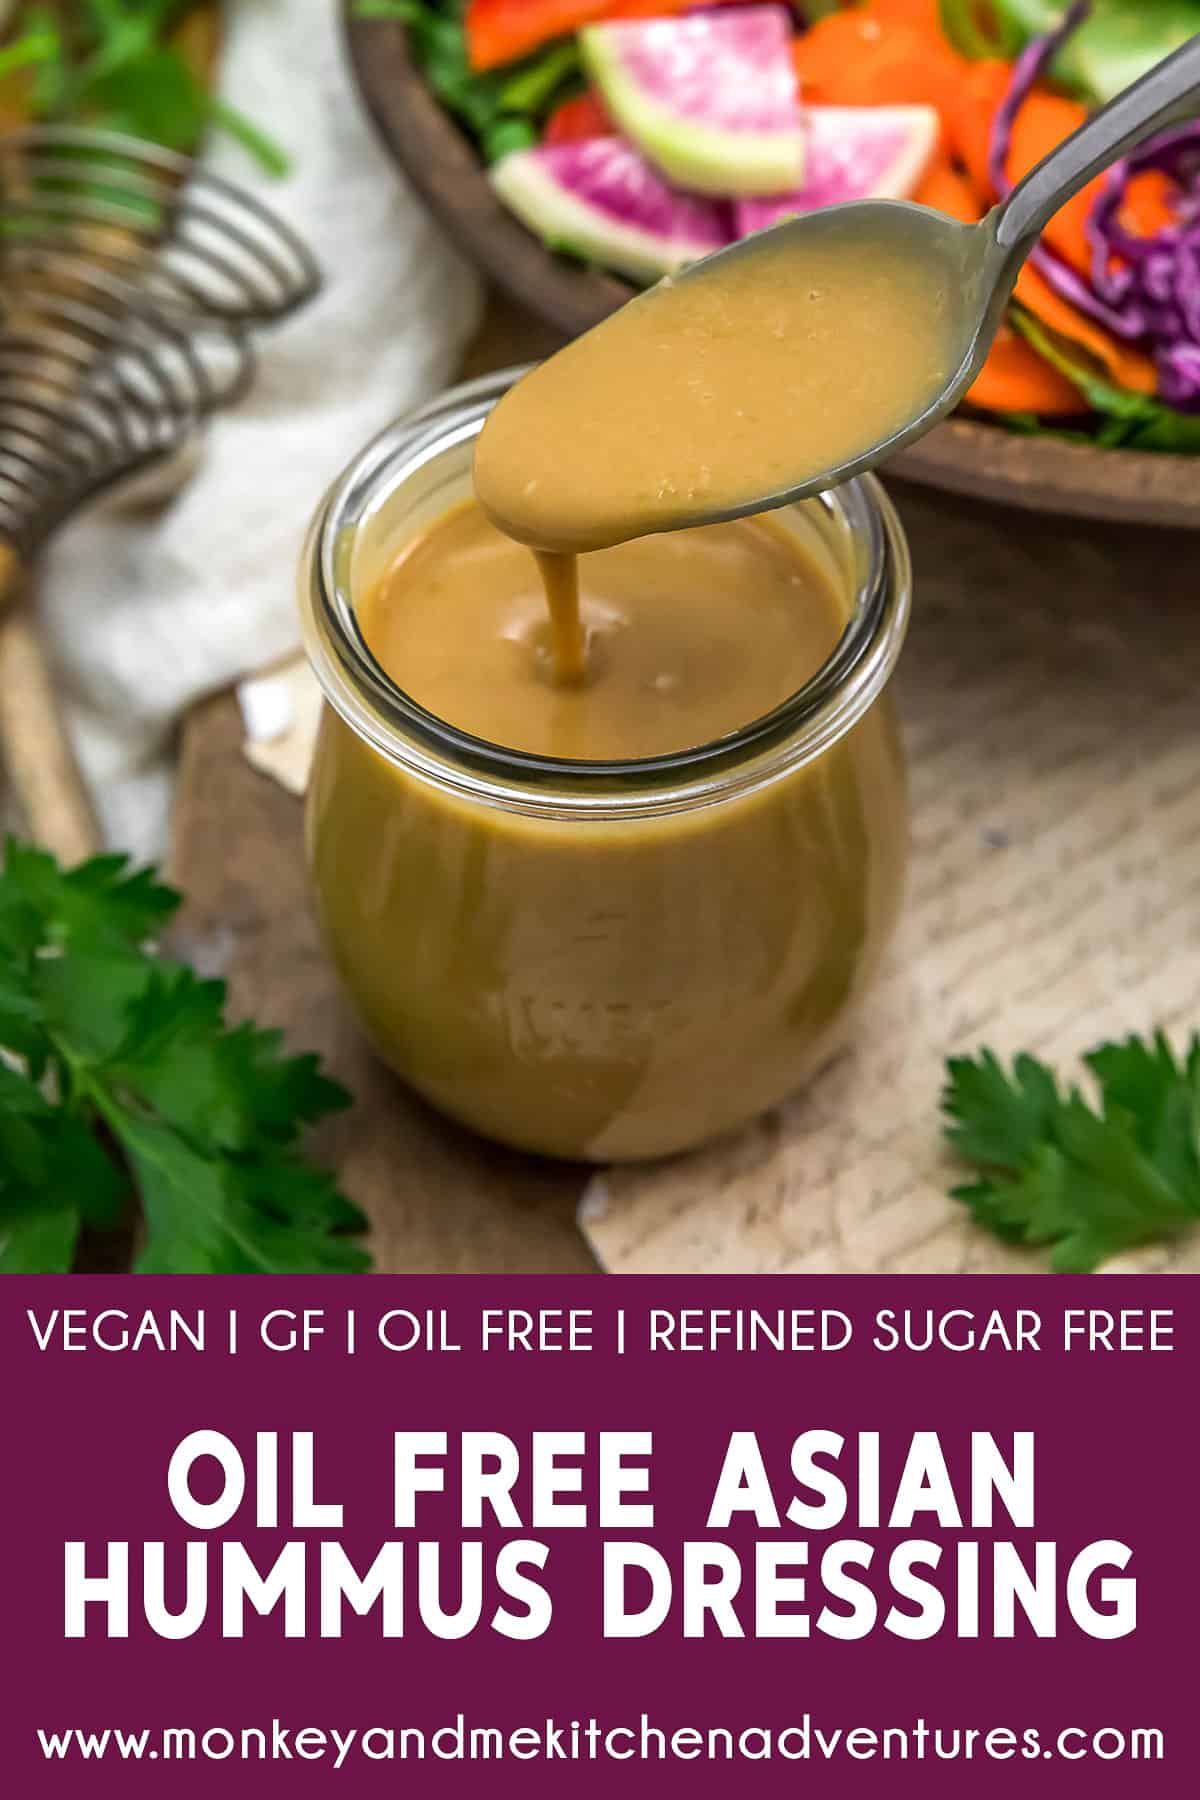 Oil Free Asian Hummus Dressing with Text Description